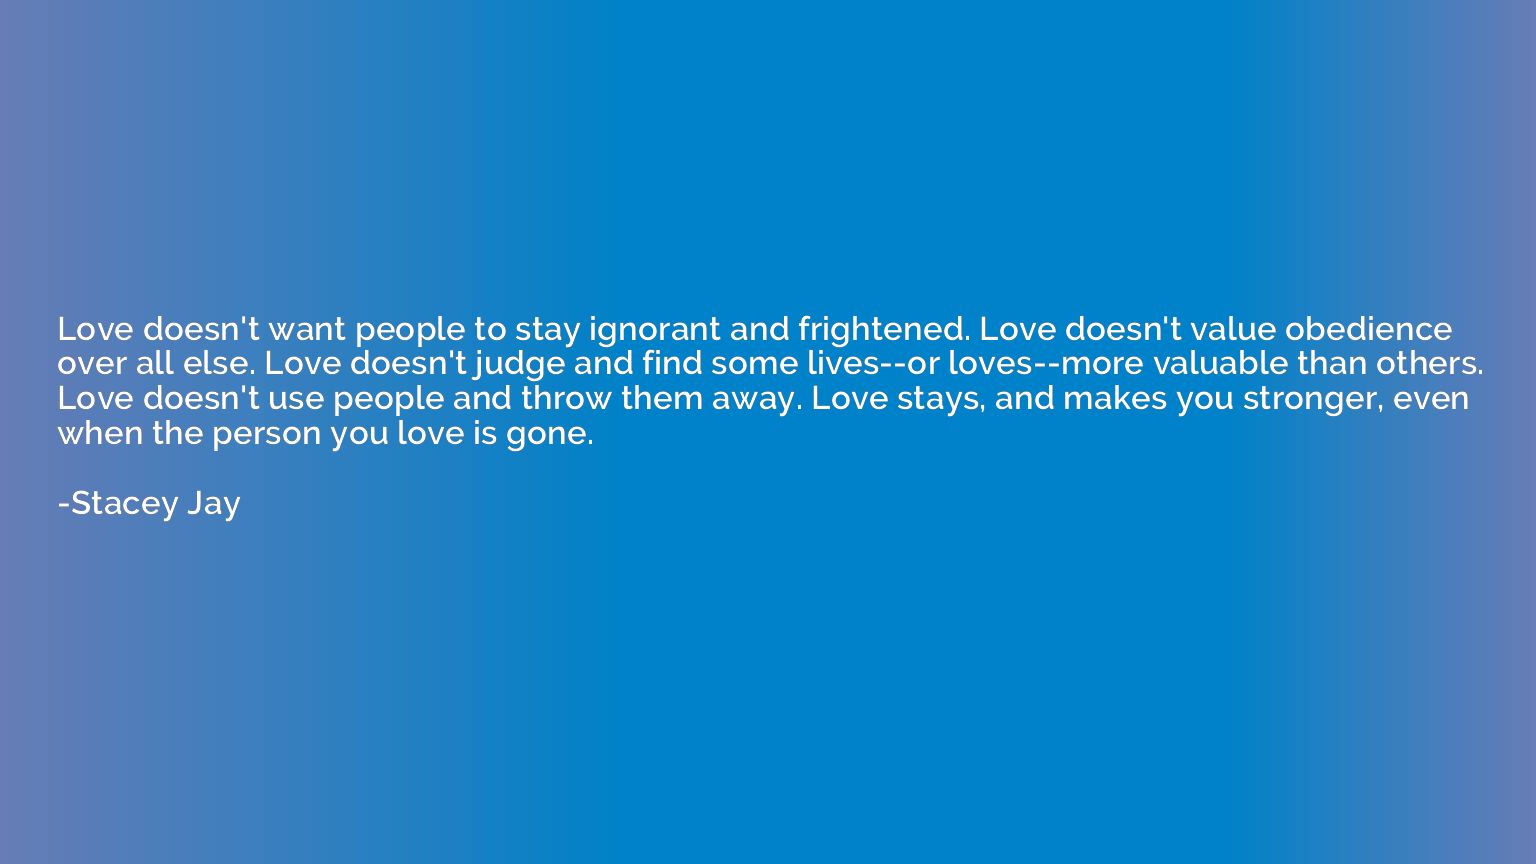 Love doesn't want people to stay ignorant and frightened. Lo